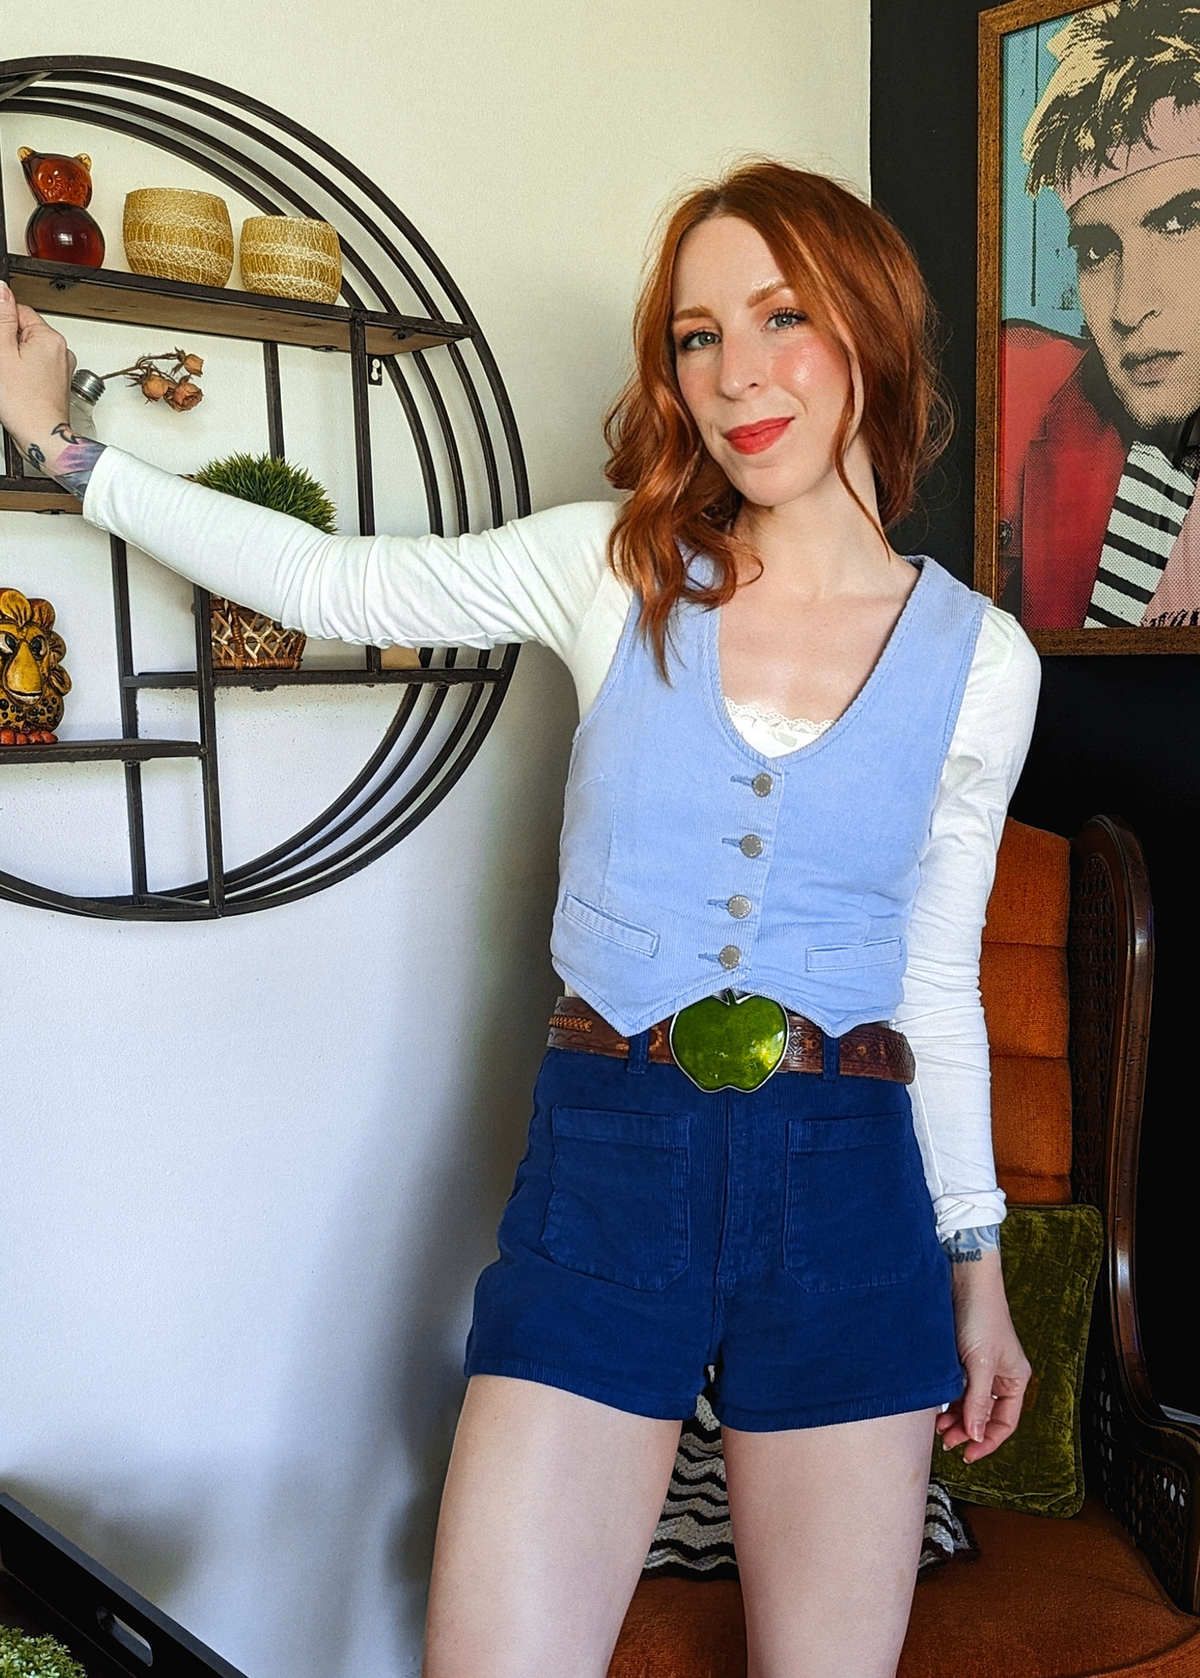 Rolla's Jeans Marine Blue Sailor Corduroy Duster Shorts. 70s inspired corduory shorts with a high rise waist and sailor patch front pockets